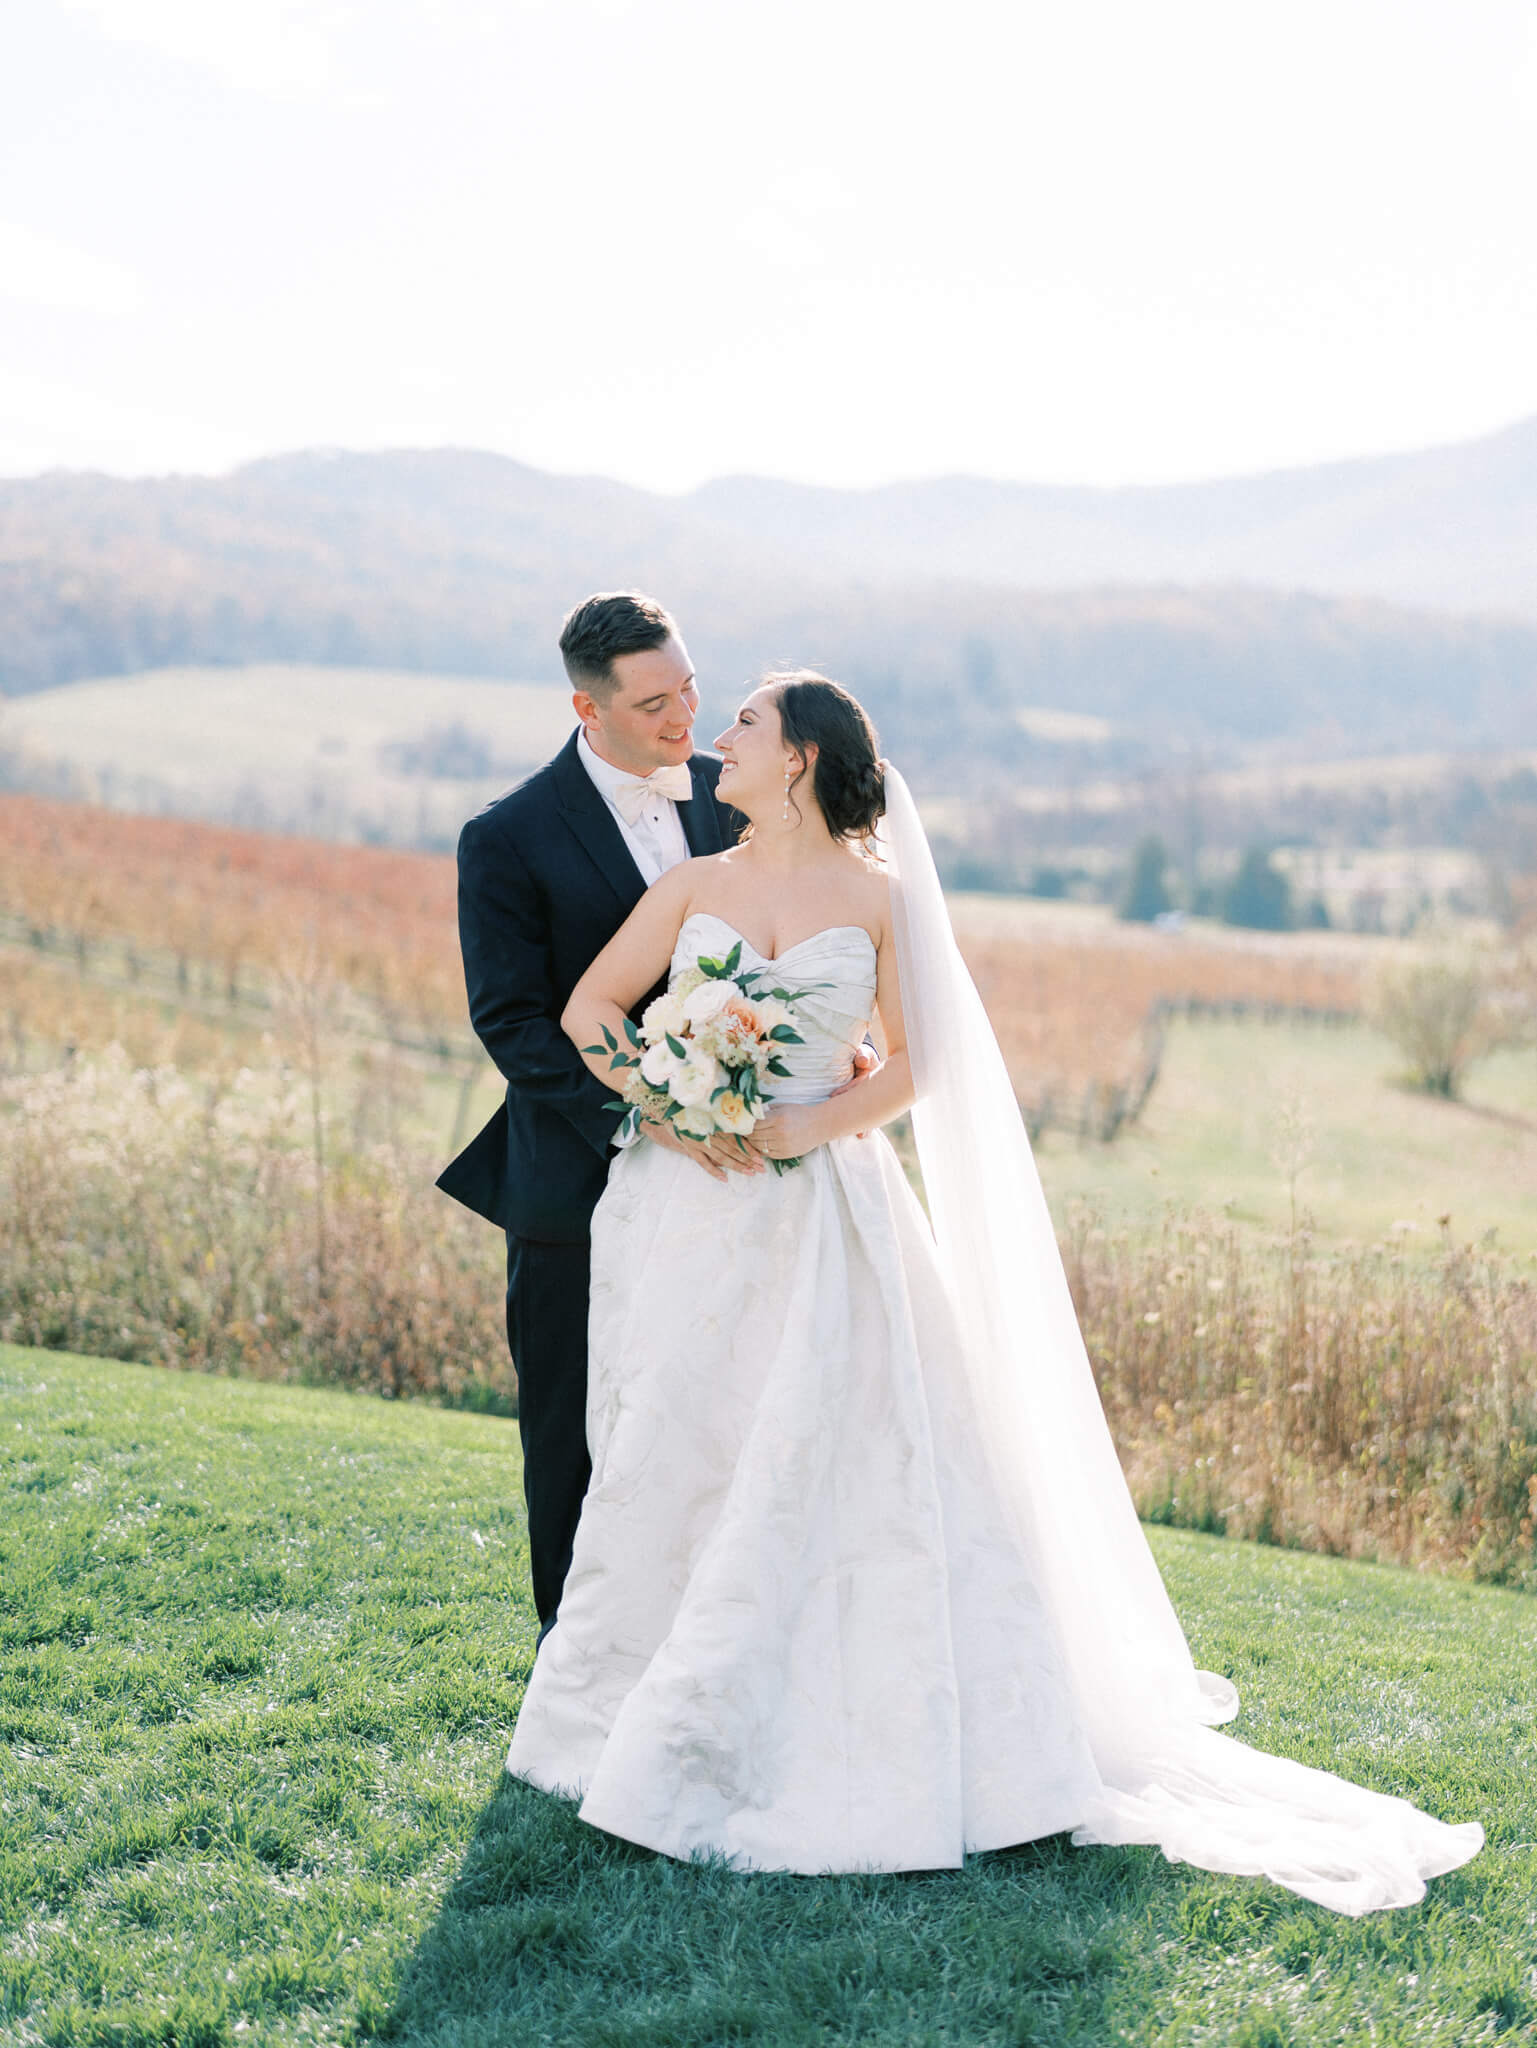 A groom standing behind a bride and embracing her while she leans in to kiss him in front of the picturesque mountain views at a Pippin Hill wedding.